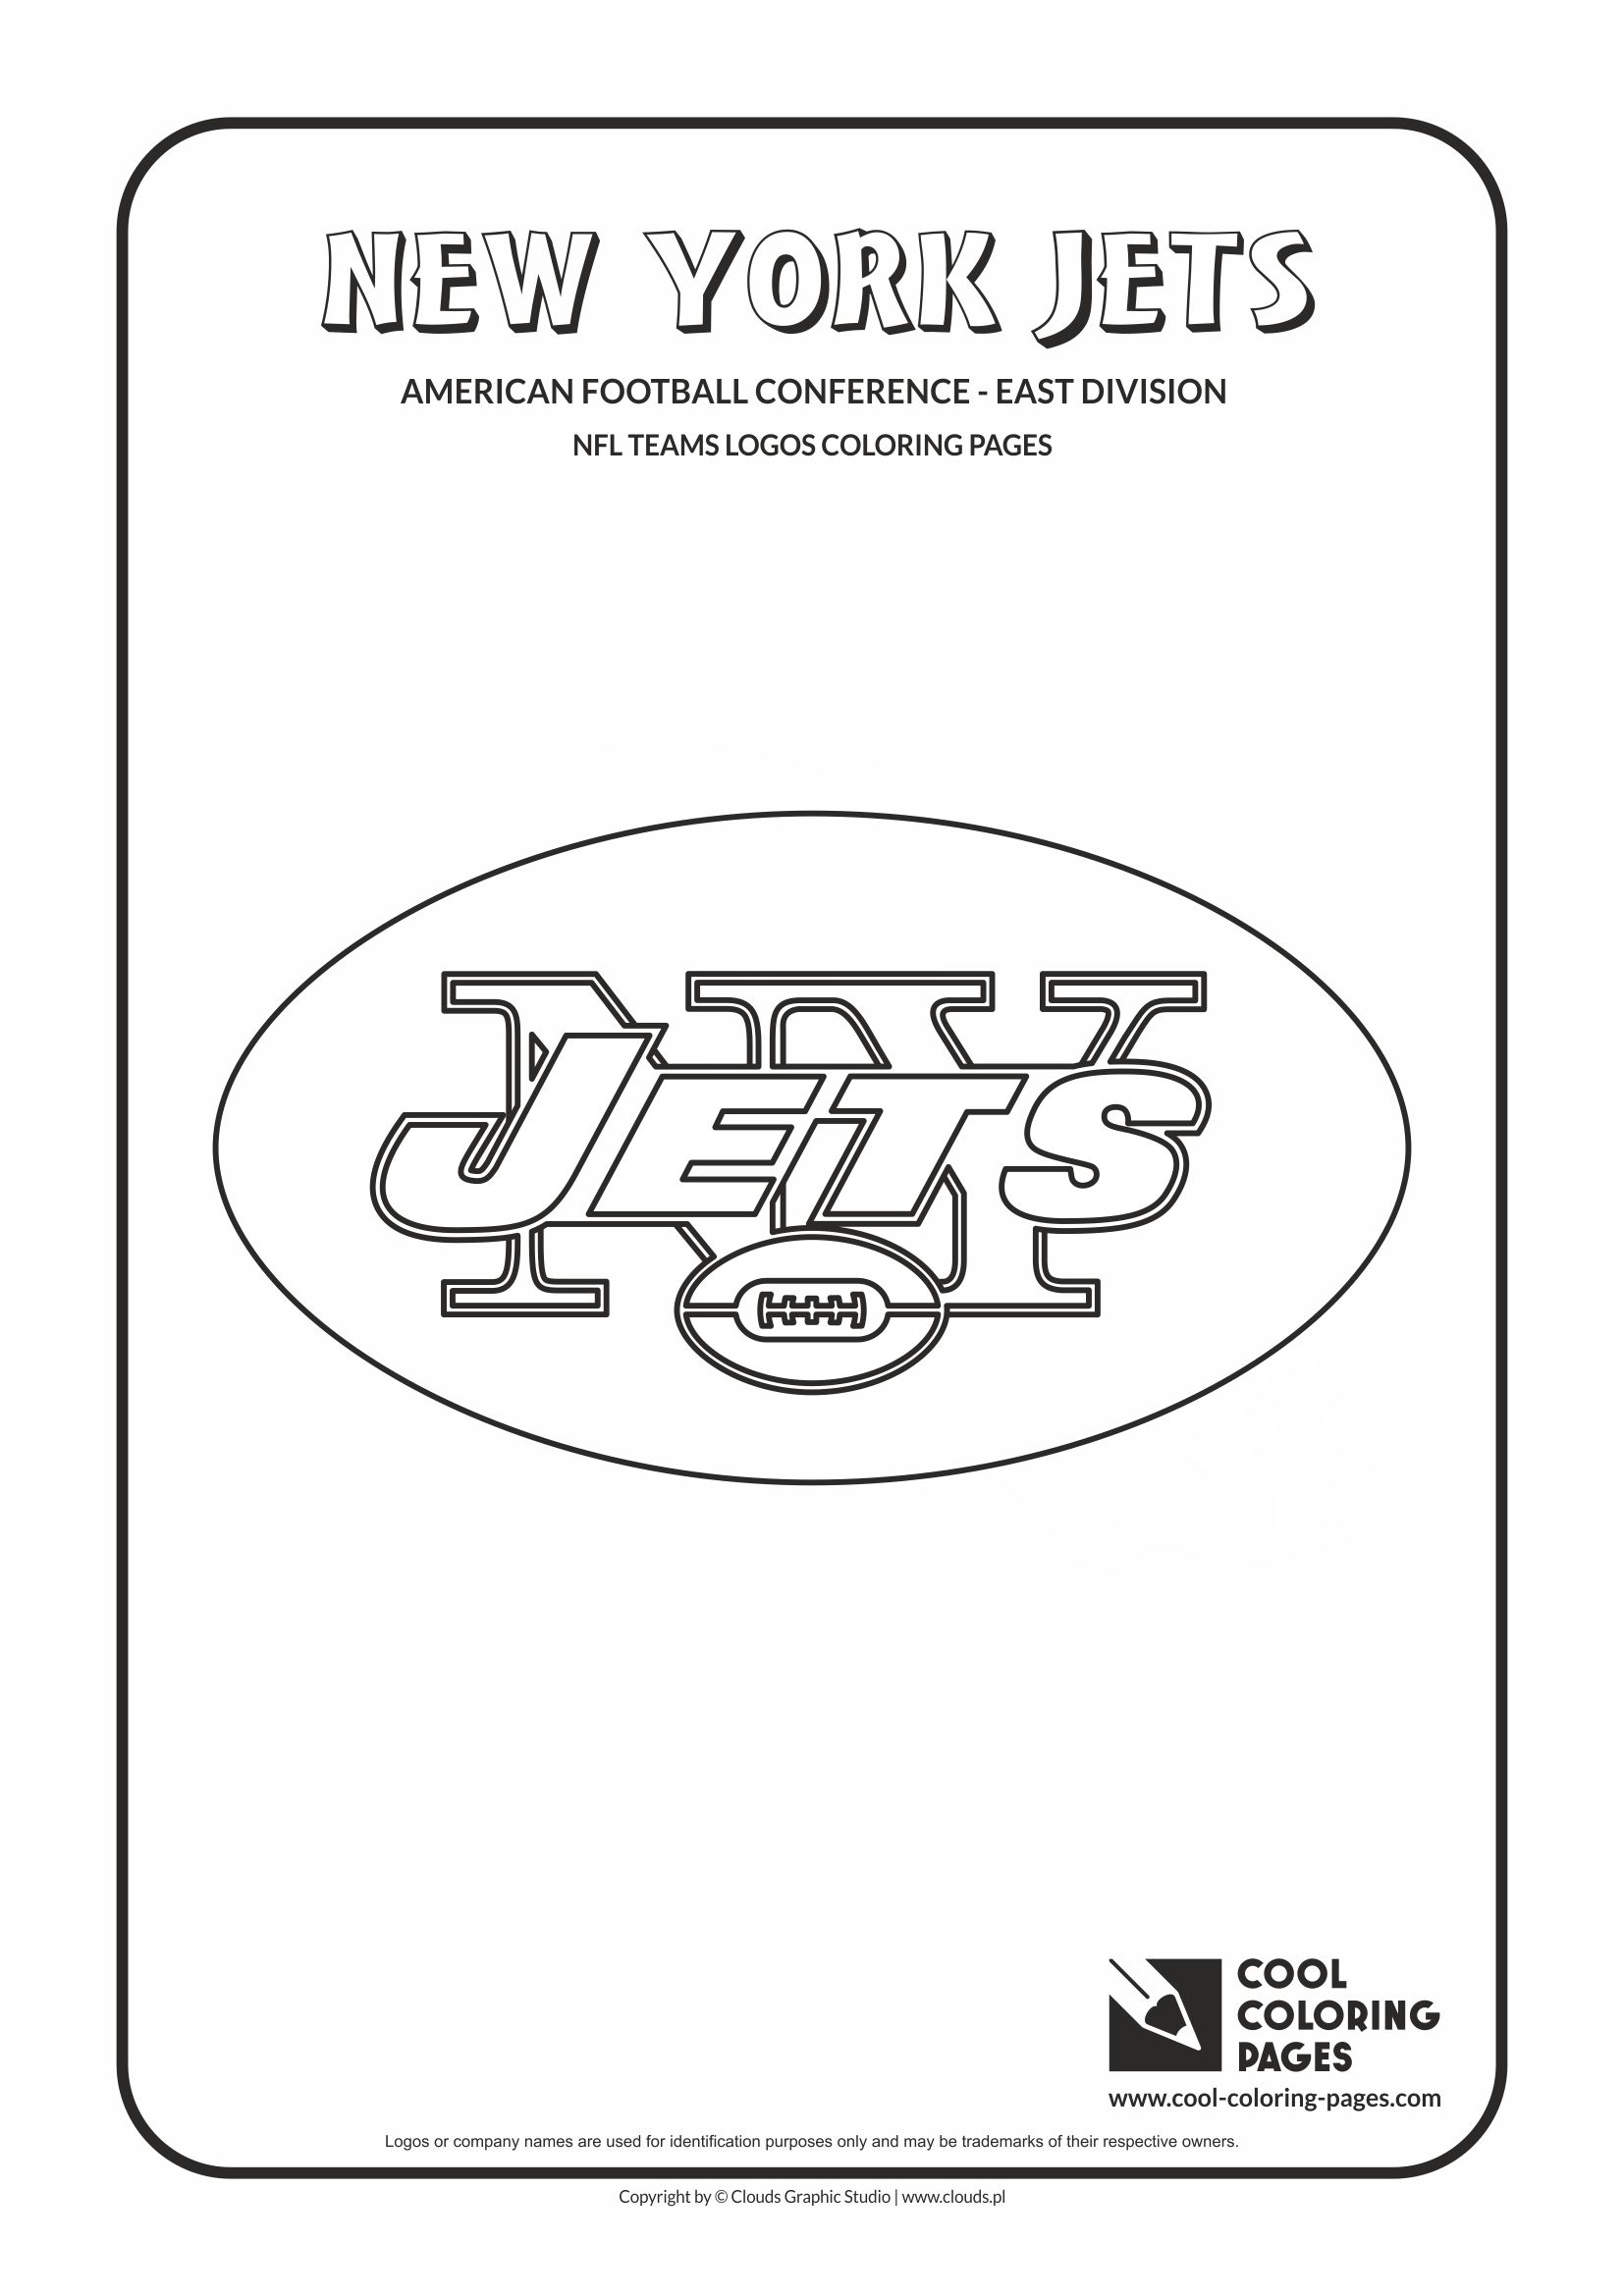 Cool Coloring Pages NFL teams logos coloring pages - Cool Coloring ...